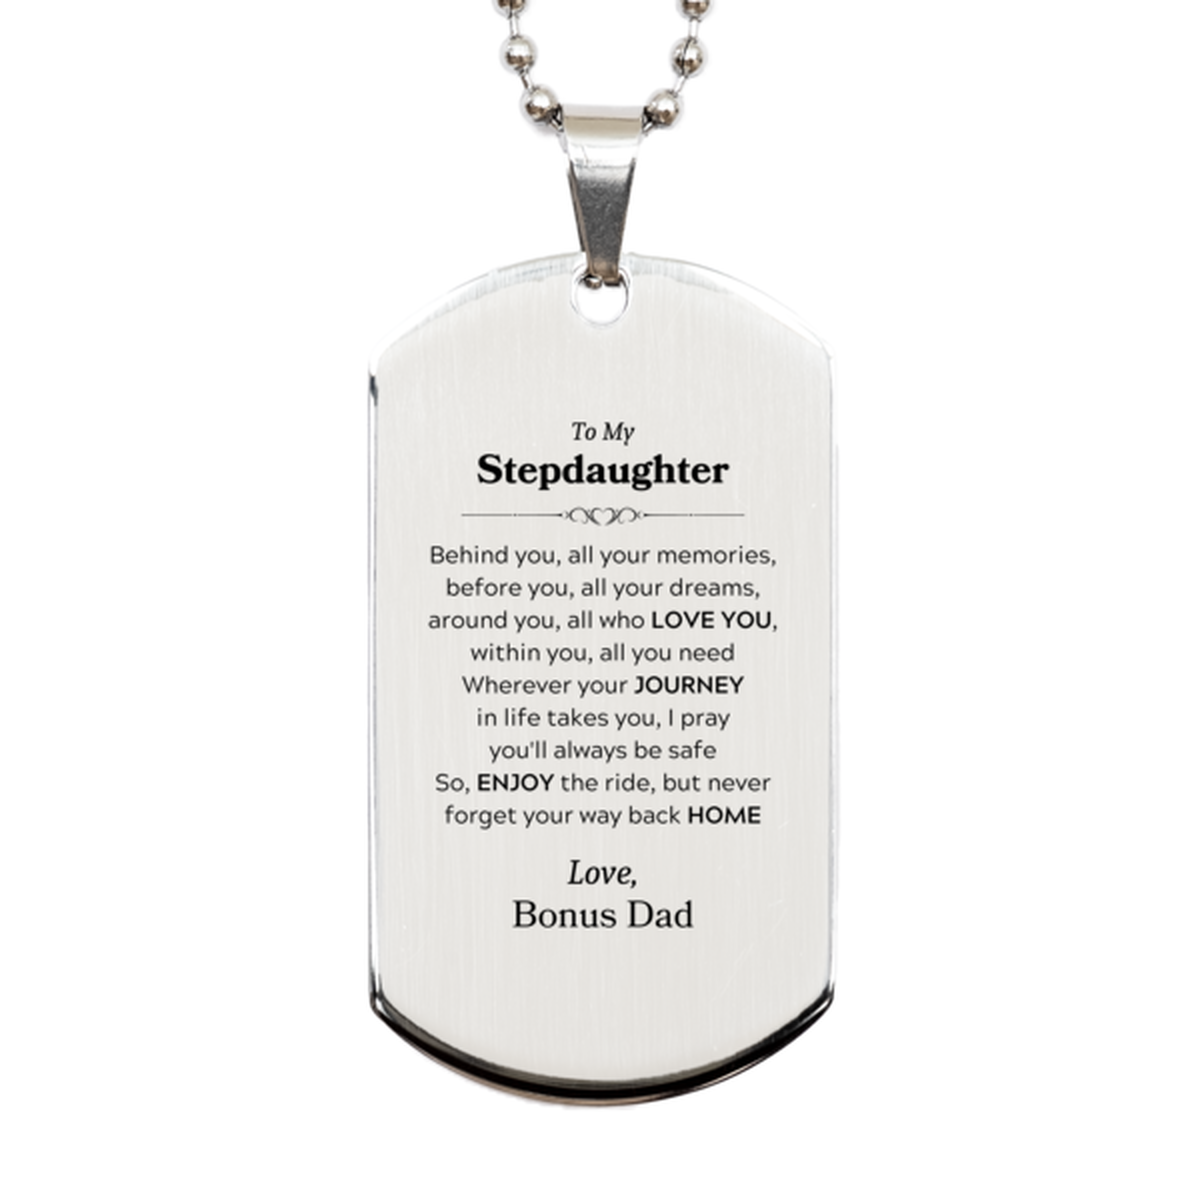 To My Stepdaughter Graduation Gifts from Bonus Dad, Stepdaughter Silver Dog Tag Christmas Birthday Gifts for Stepdaughter Behind you, all your memories, before you, all your dreams. Love, Bonus Dad